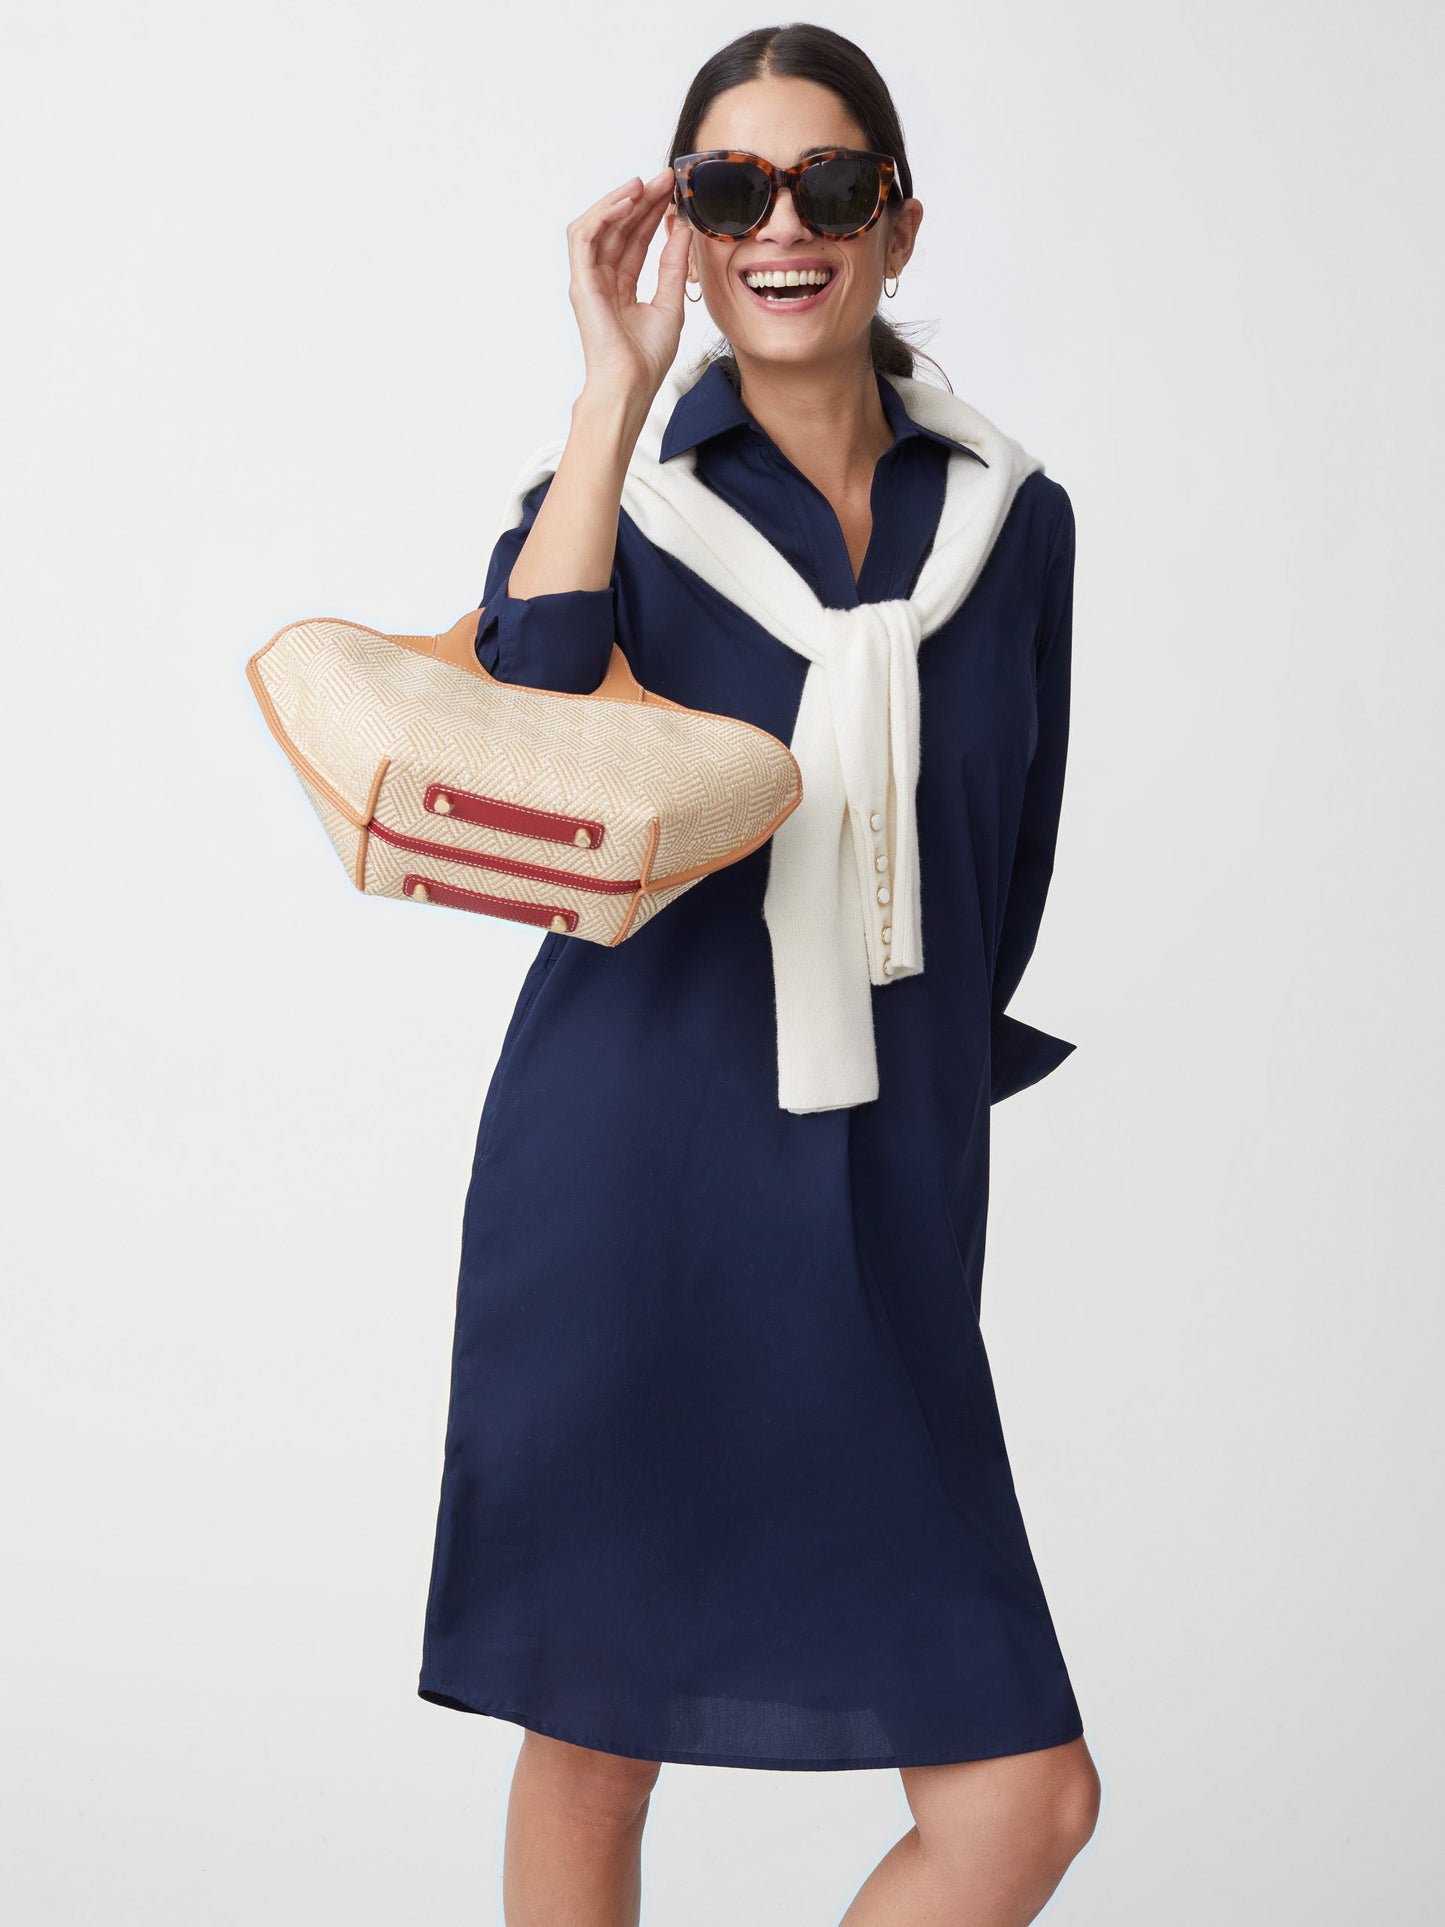 Model wears J.McLaughlin Cagney Dress in navy made with cotton and spandex.